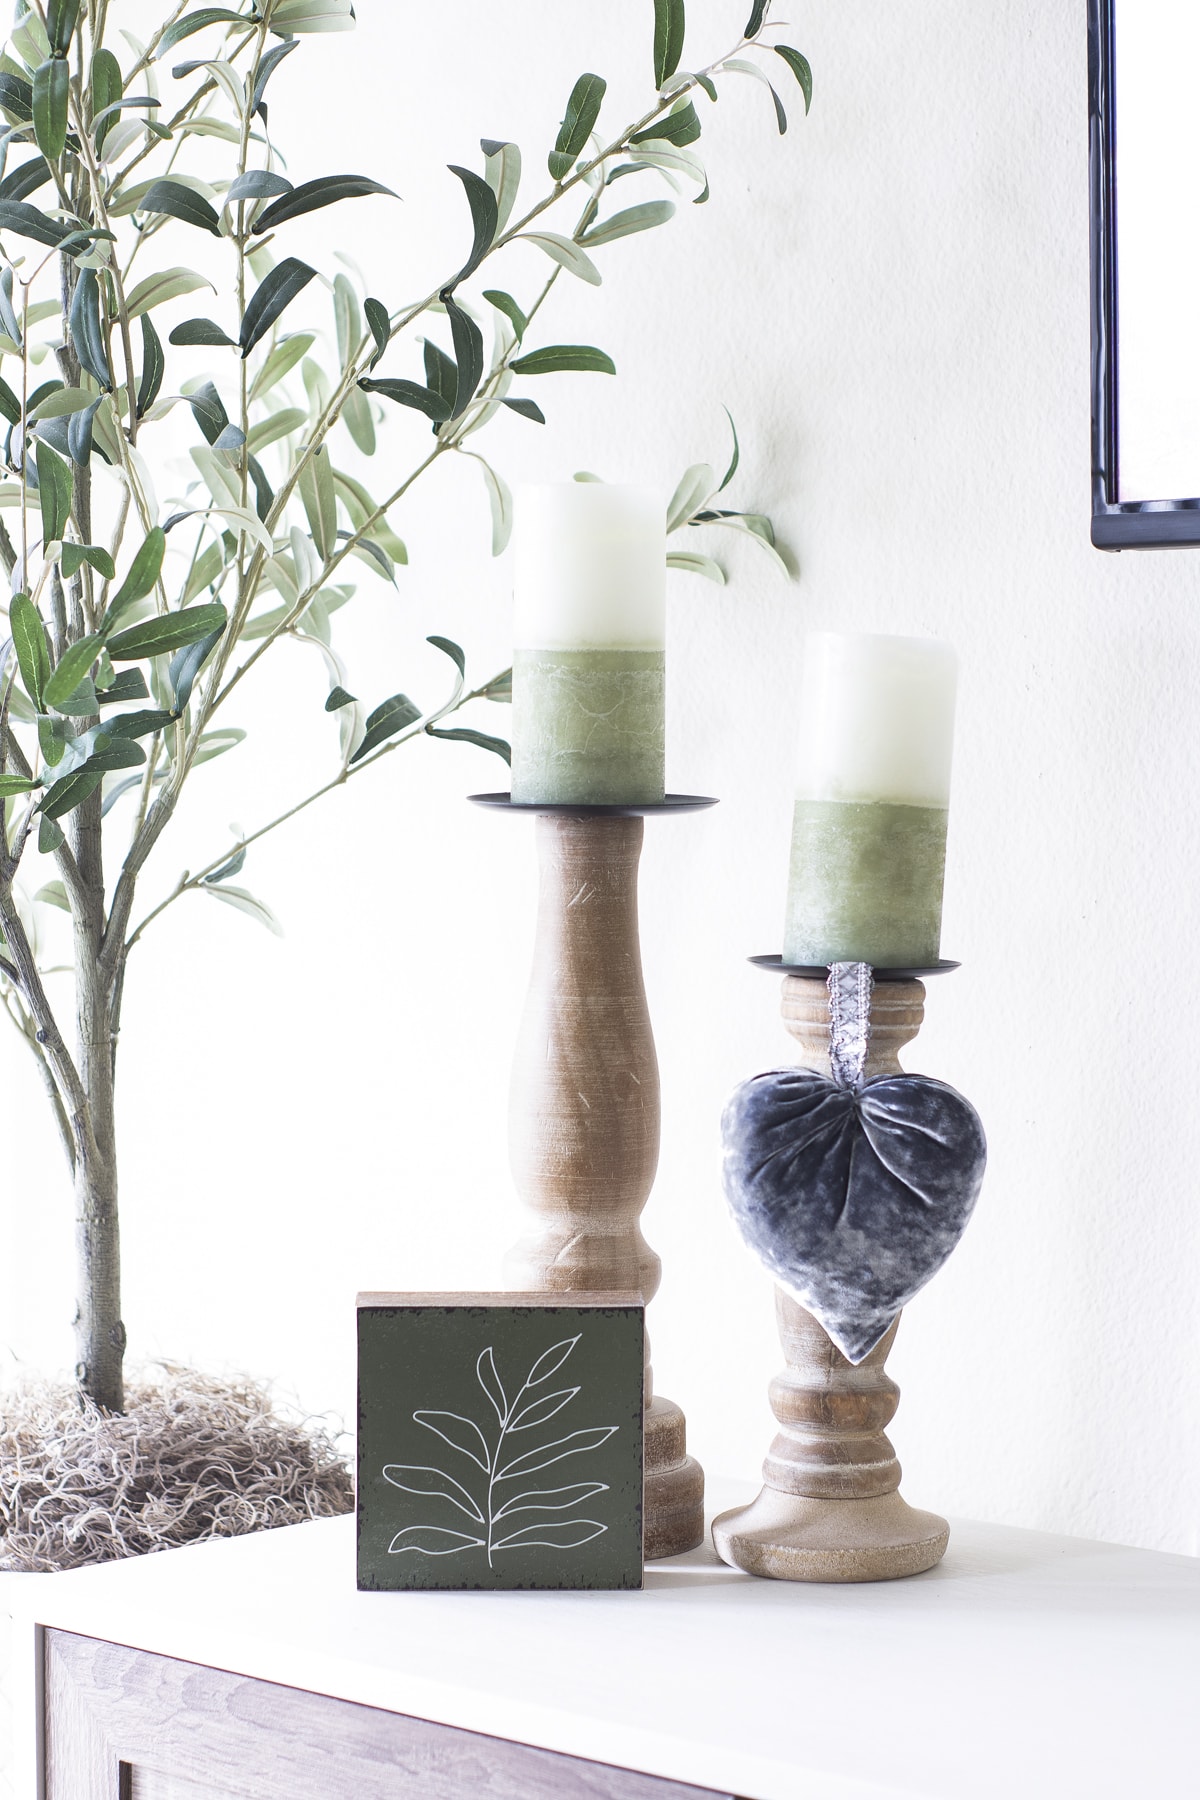 wooden candlesticks with green and white candles and velvet heart with leaf sign on console